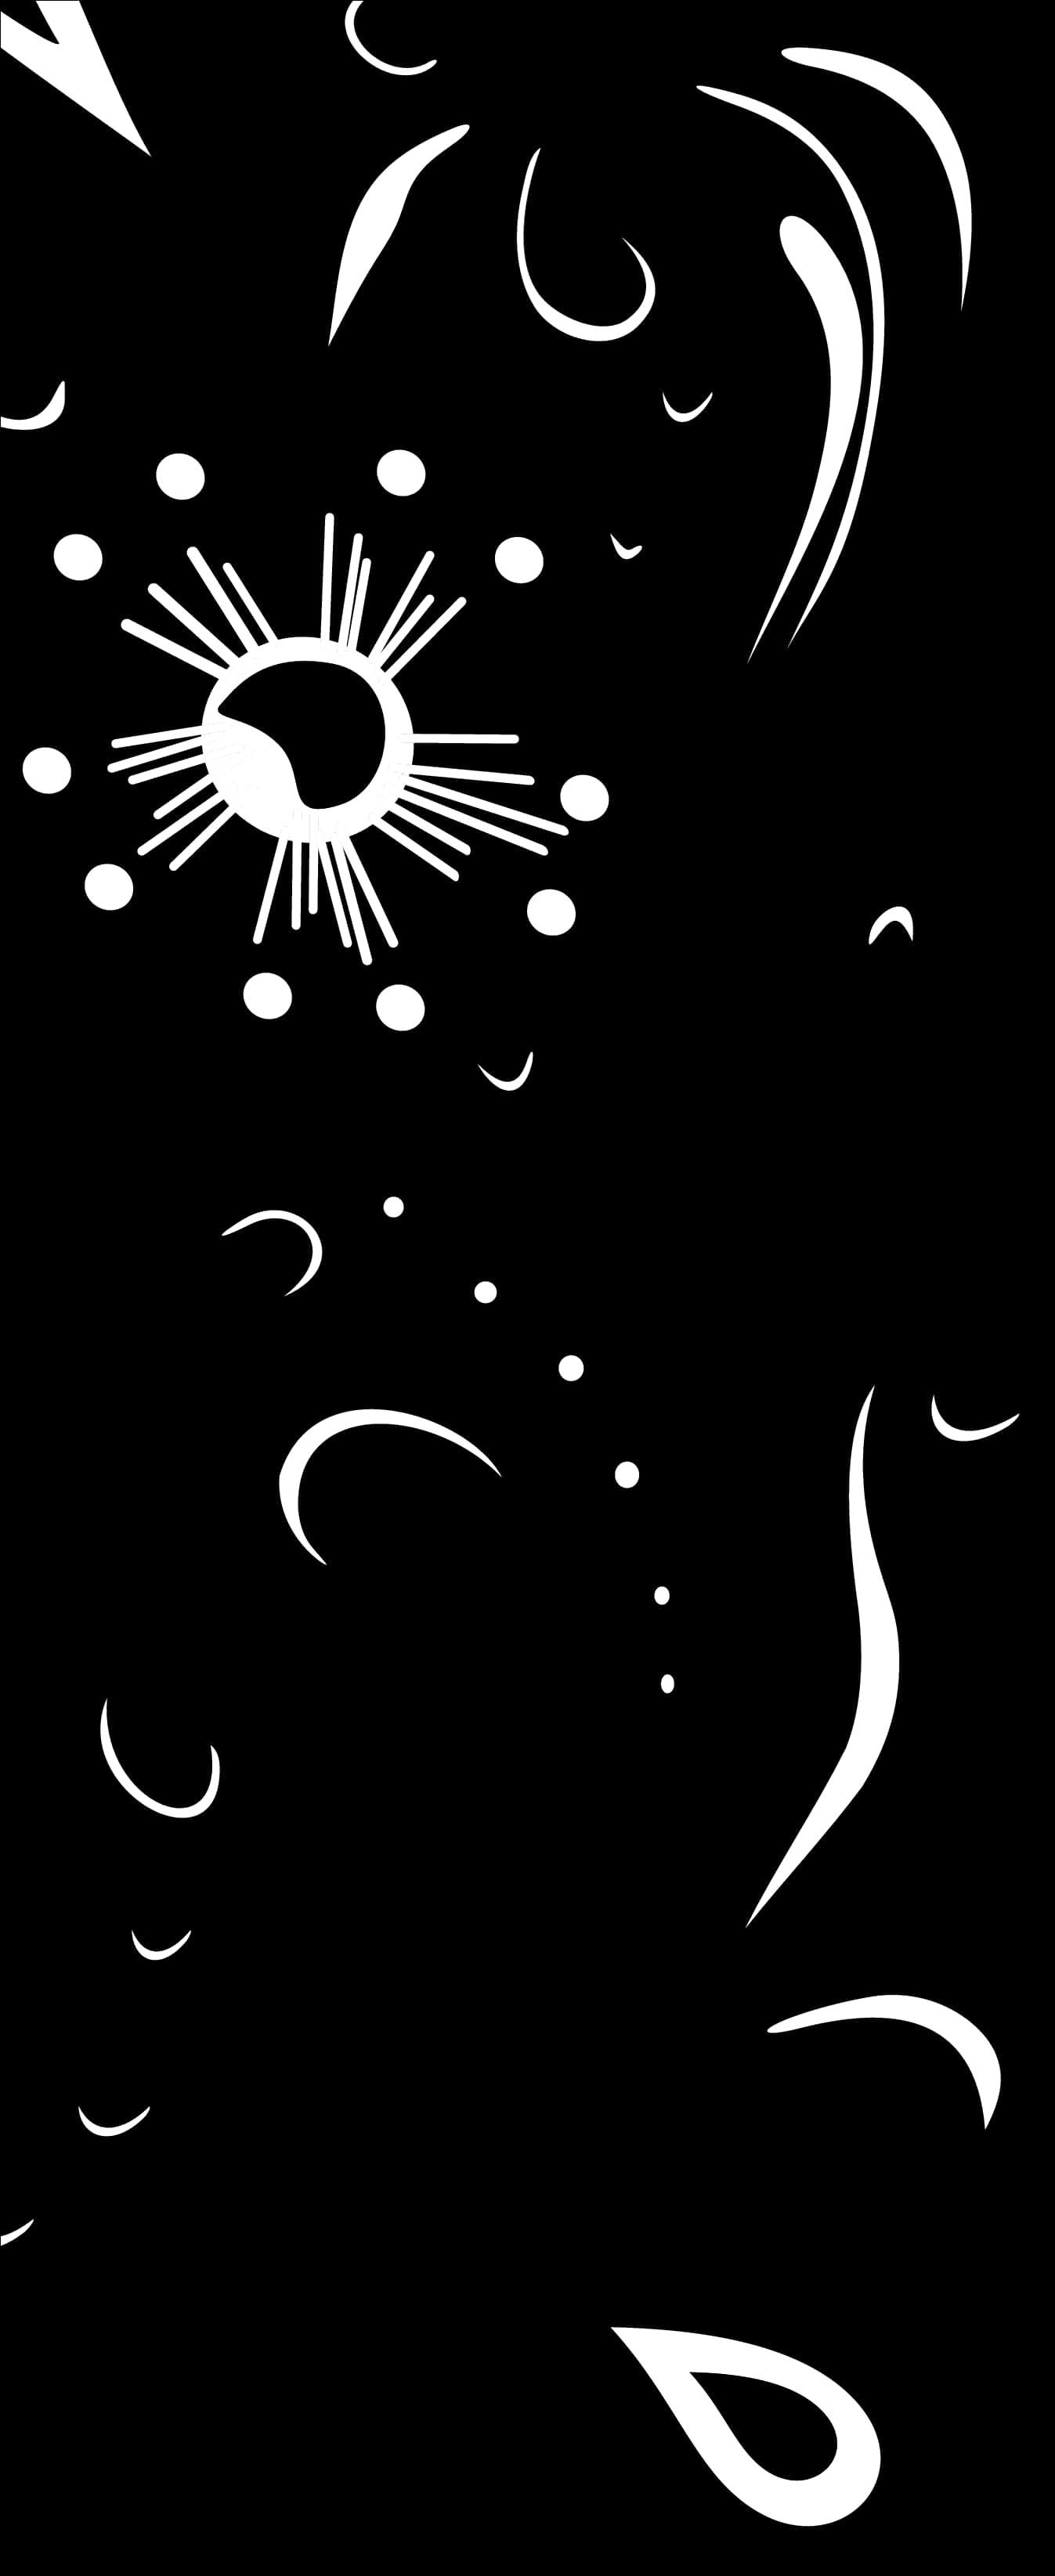 Abstract Sunand Swirls Black Background PNG image